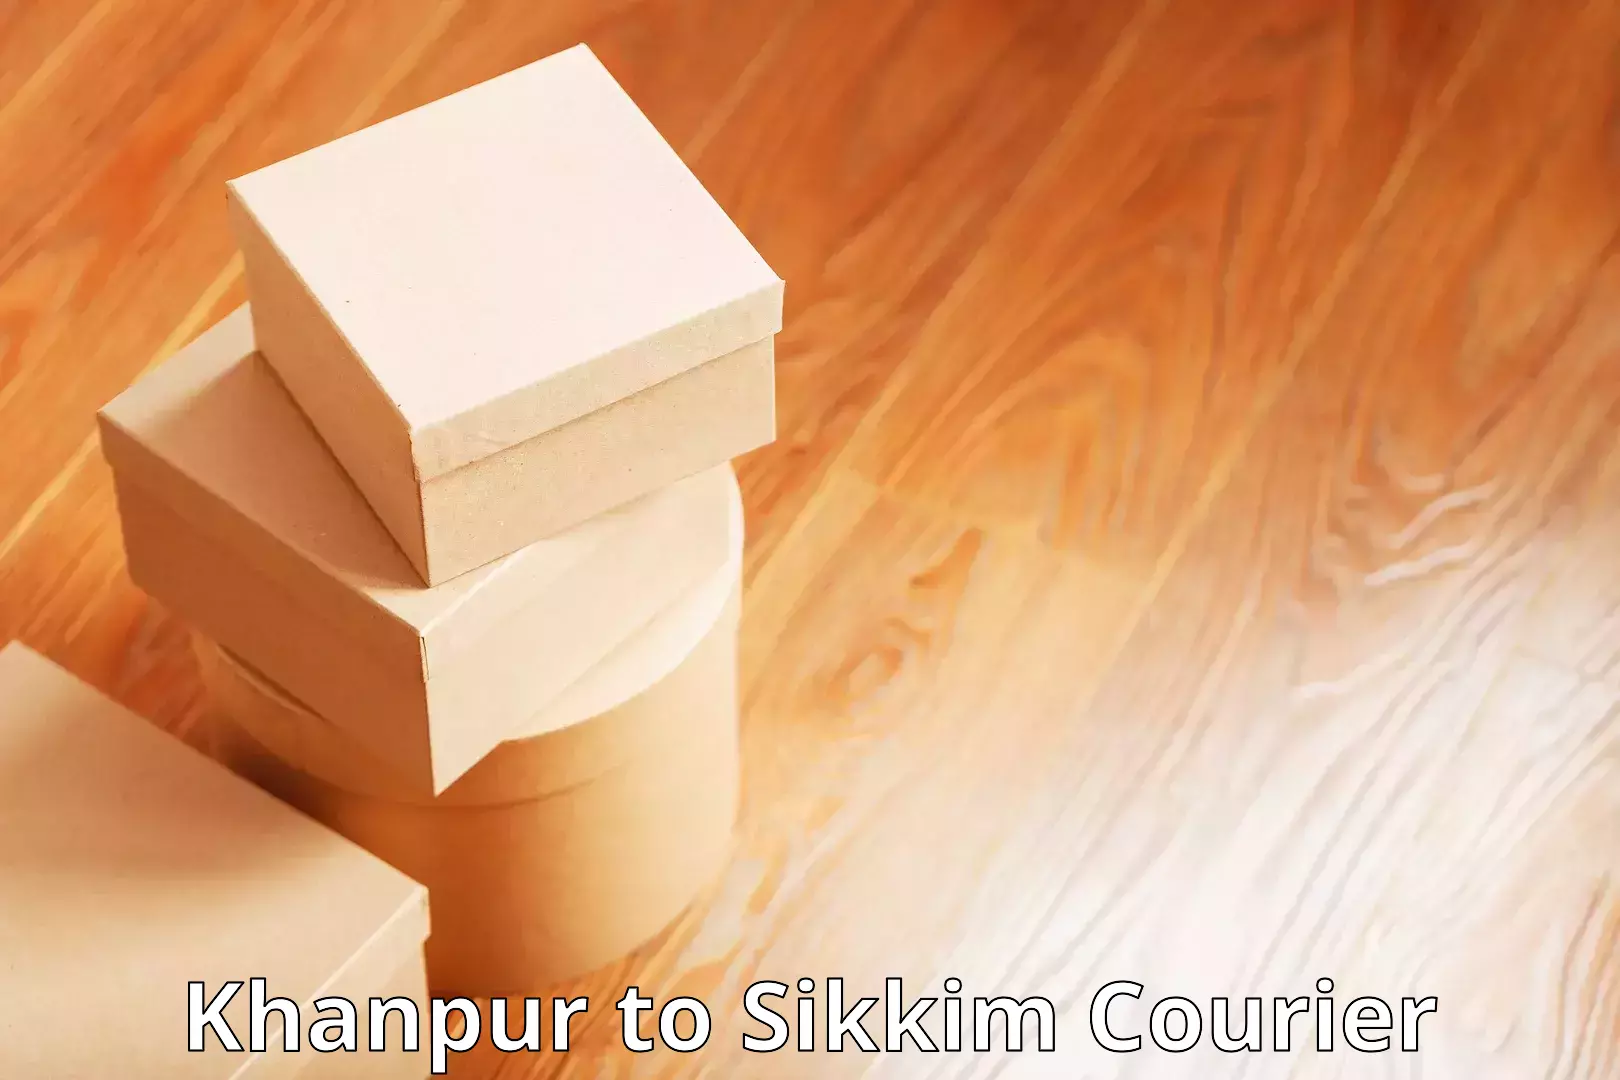 Enhanced shipping experience Khanpur to Sikkim